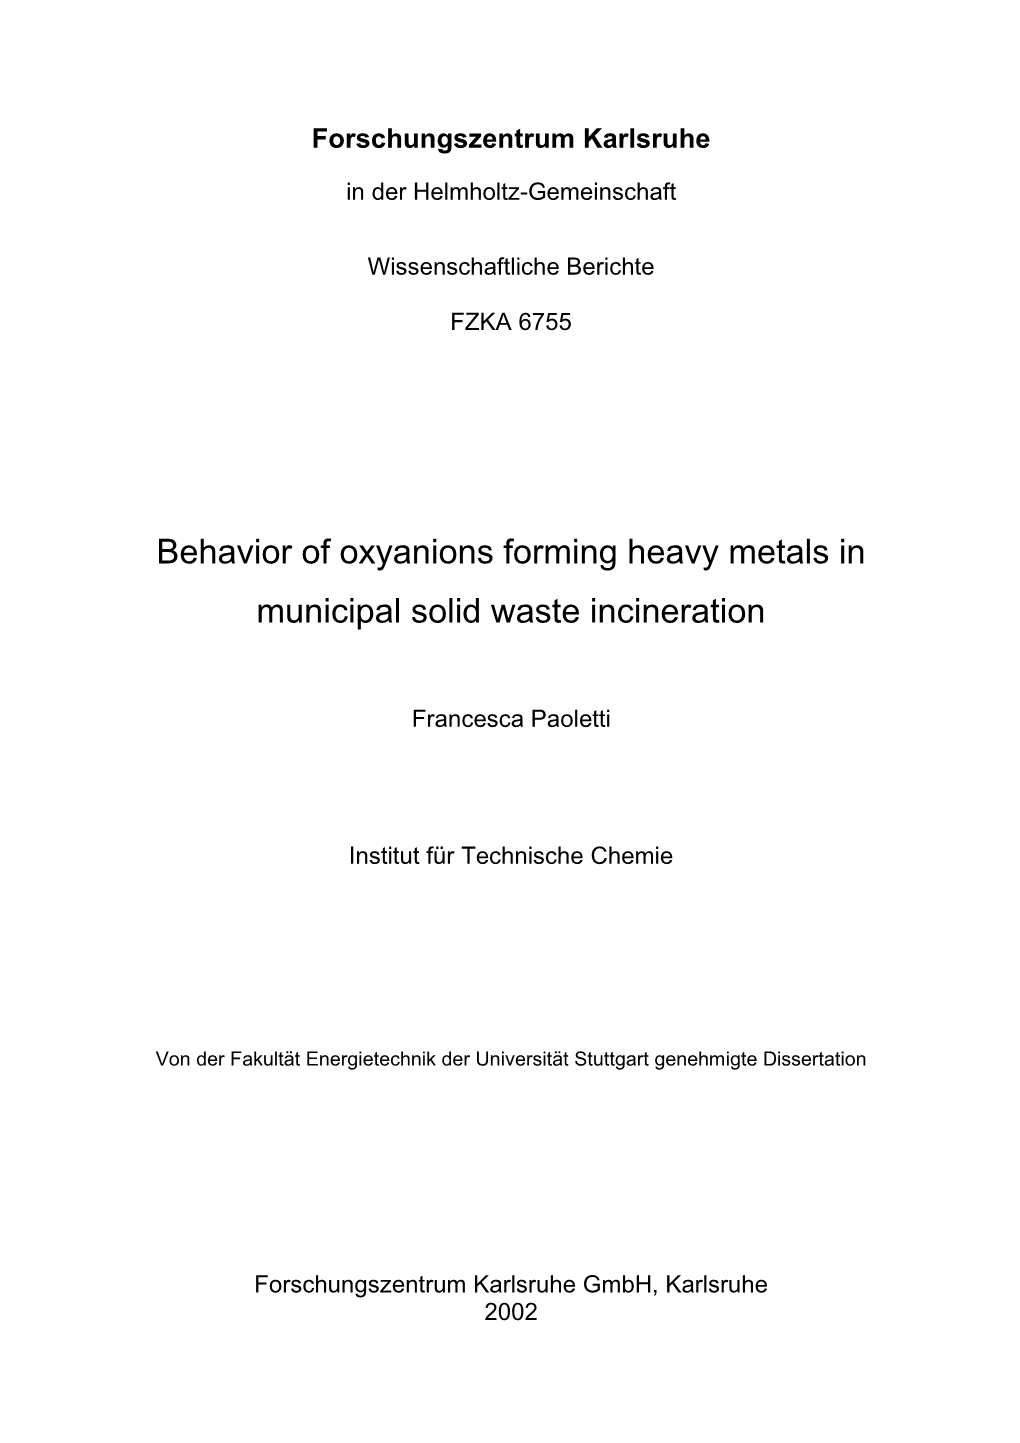 Behavior of Oxyanions Forming Heavy Metals in Municipal Solid Waste Incineration